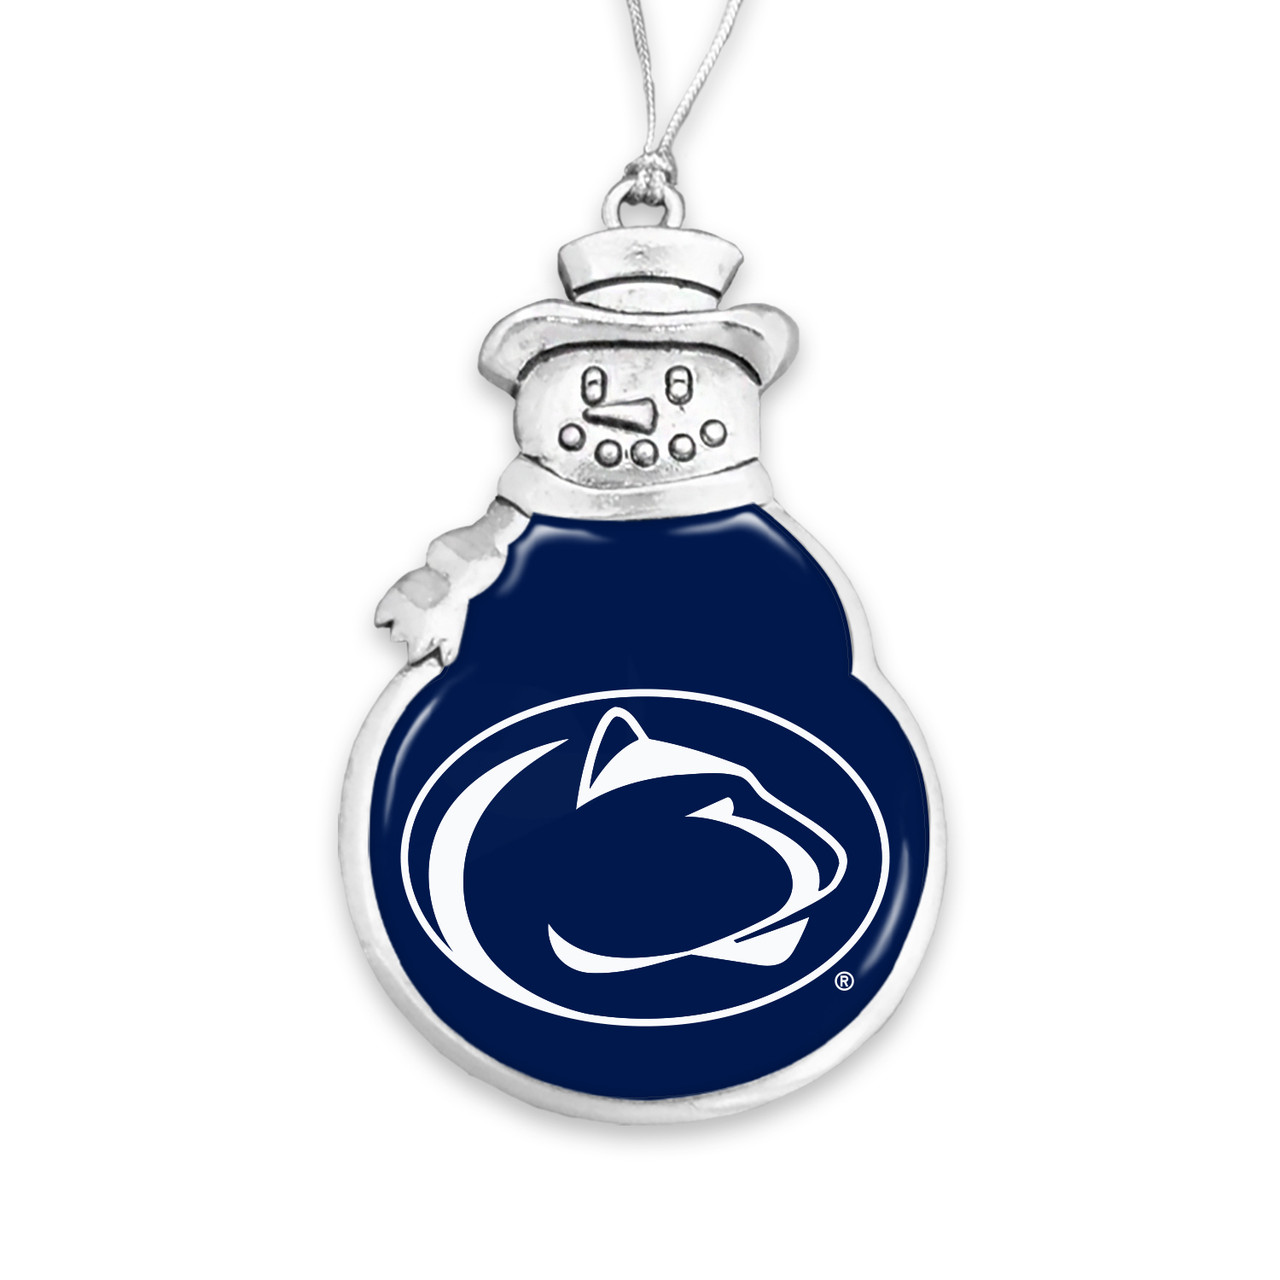 Snowman Penn State Nittany Lions Christmas Ornament